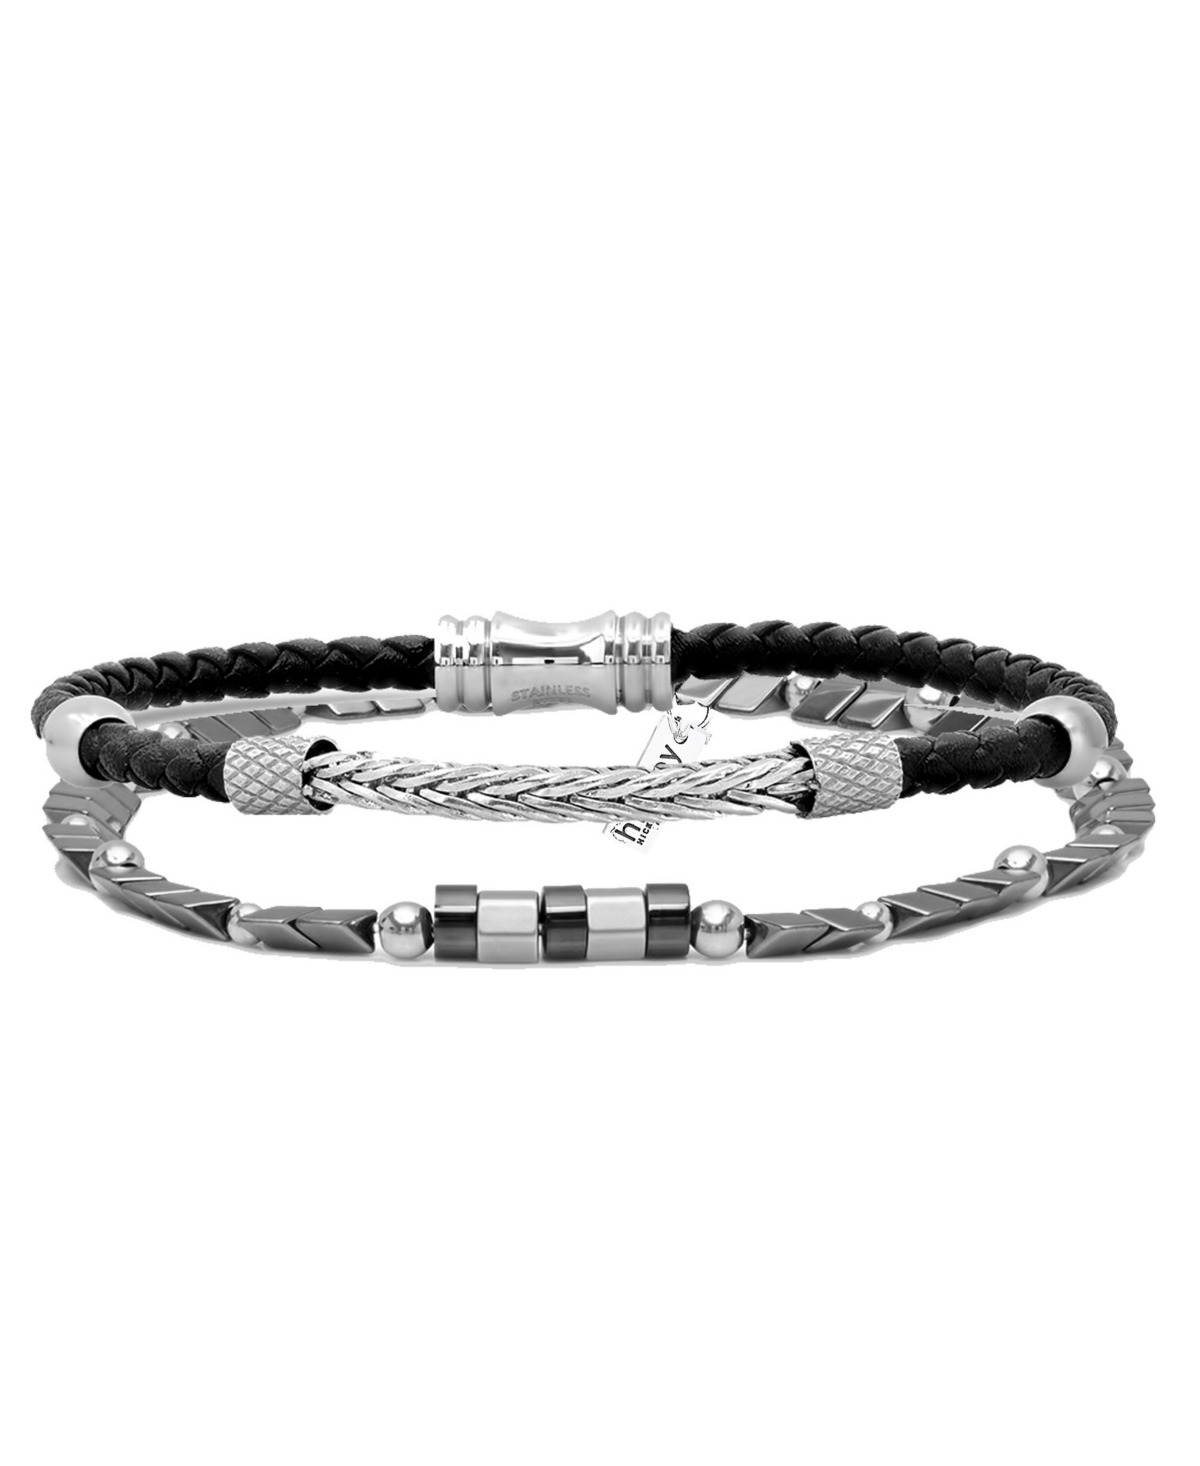 hickey by Hickey Freeman Thin Genuine Leather with Braided Metal Accent Id Hematite Bracelet, 2 Piece Set - Multi